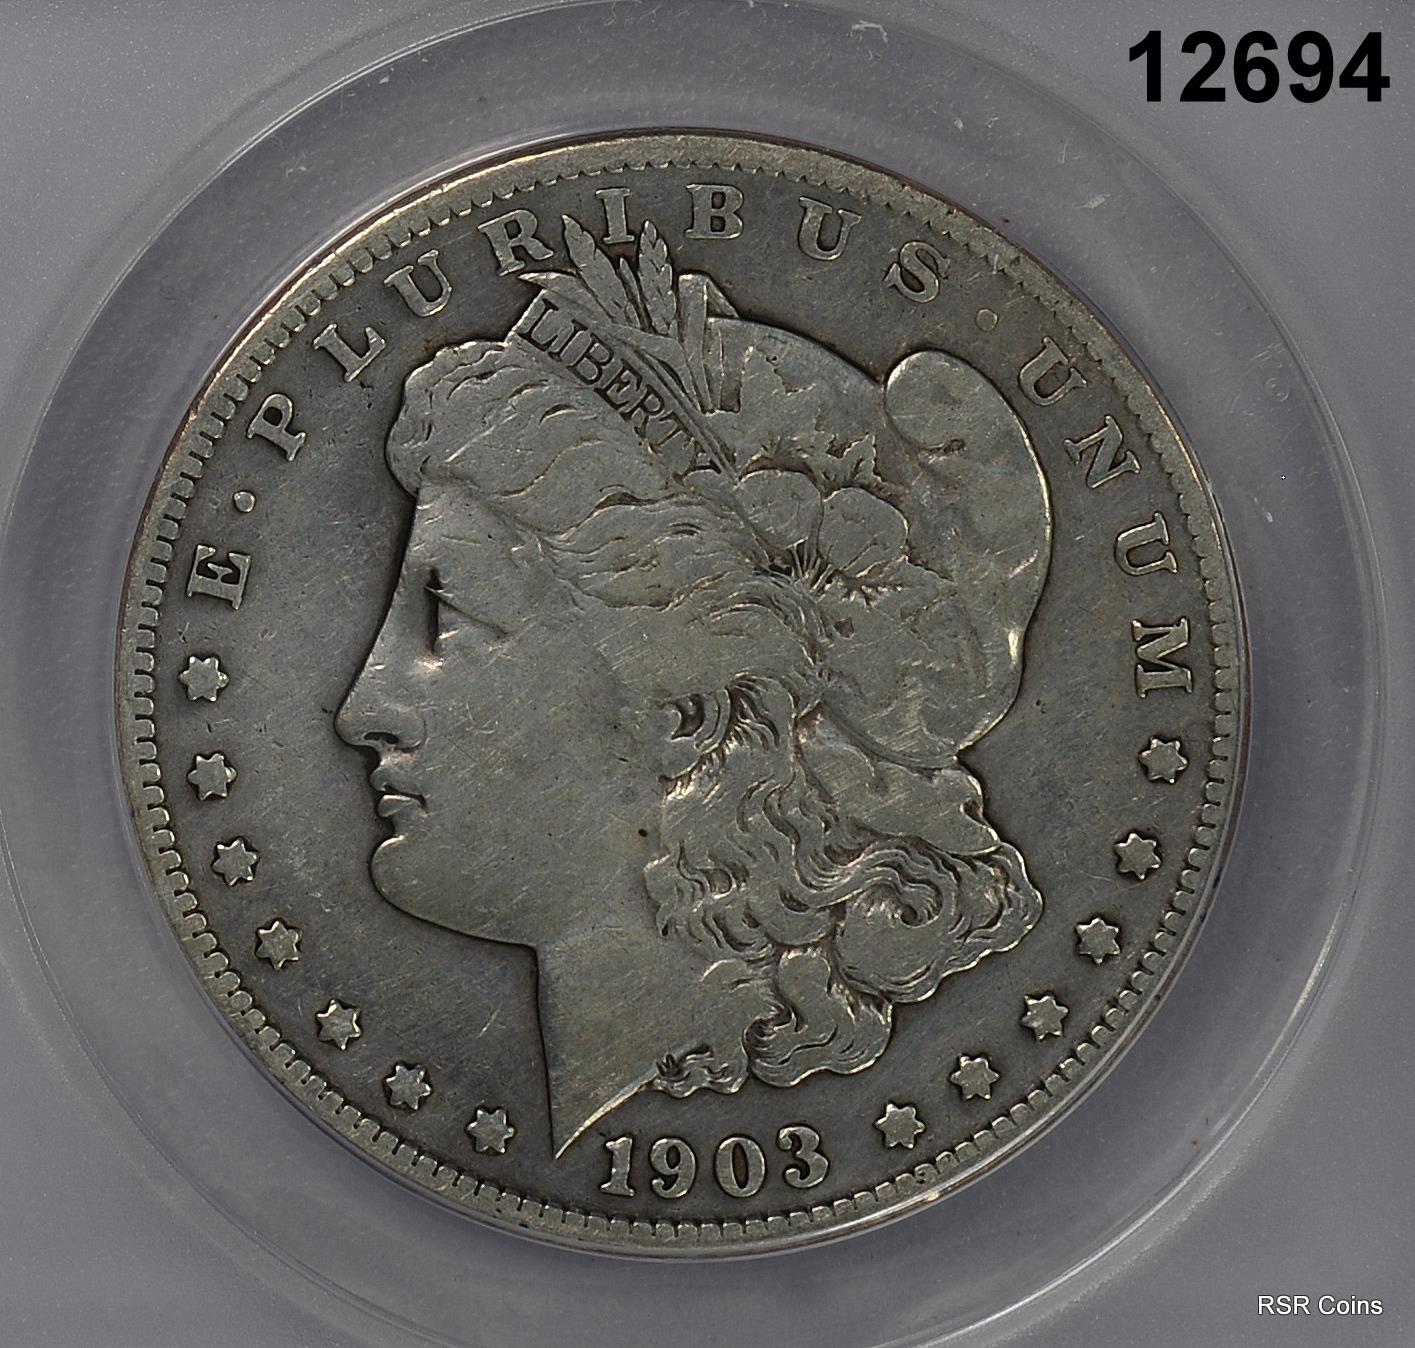 1903 S MORGAN SILVER DOLLAR ANACS CERTIFIED VF20 CLEANED RARE DATE! #12694